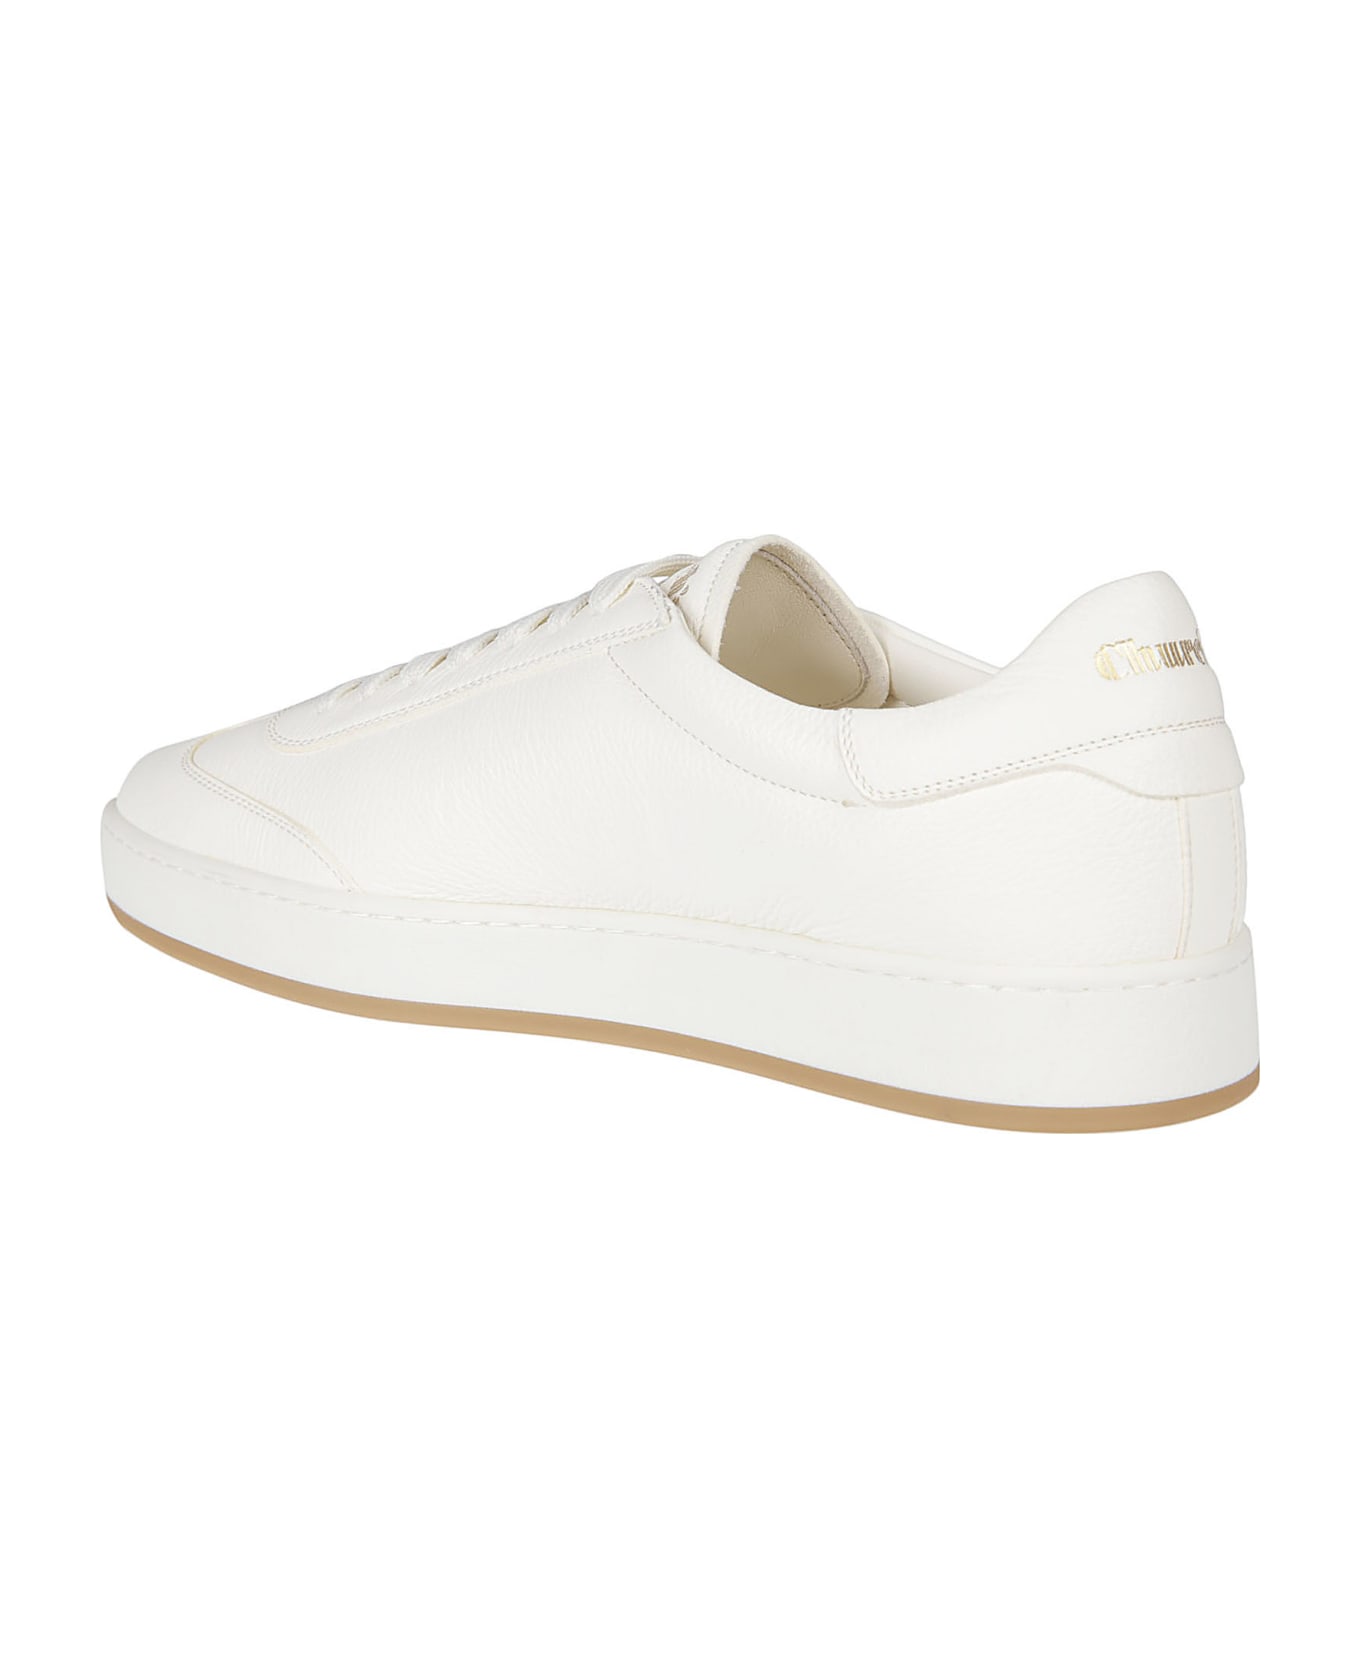 Church's Largs 2 Sneakers - All Ivory スニーカー